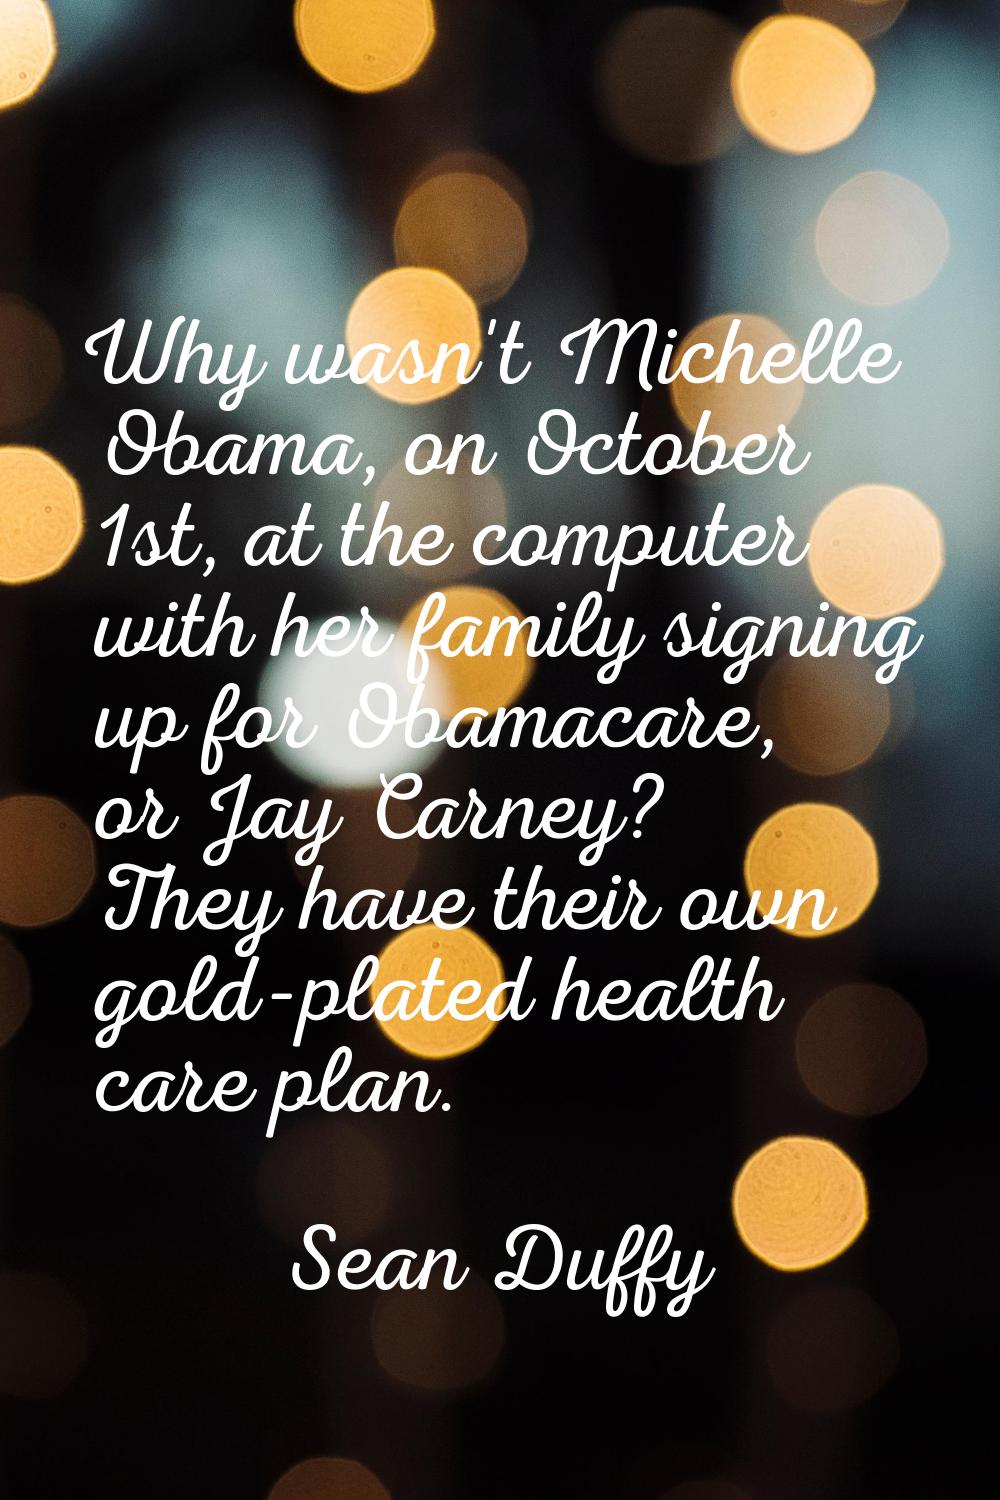 Why wasn't Michelle Obama, on October 1st, at the computer with her family signing up for Obamacare